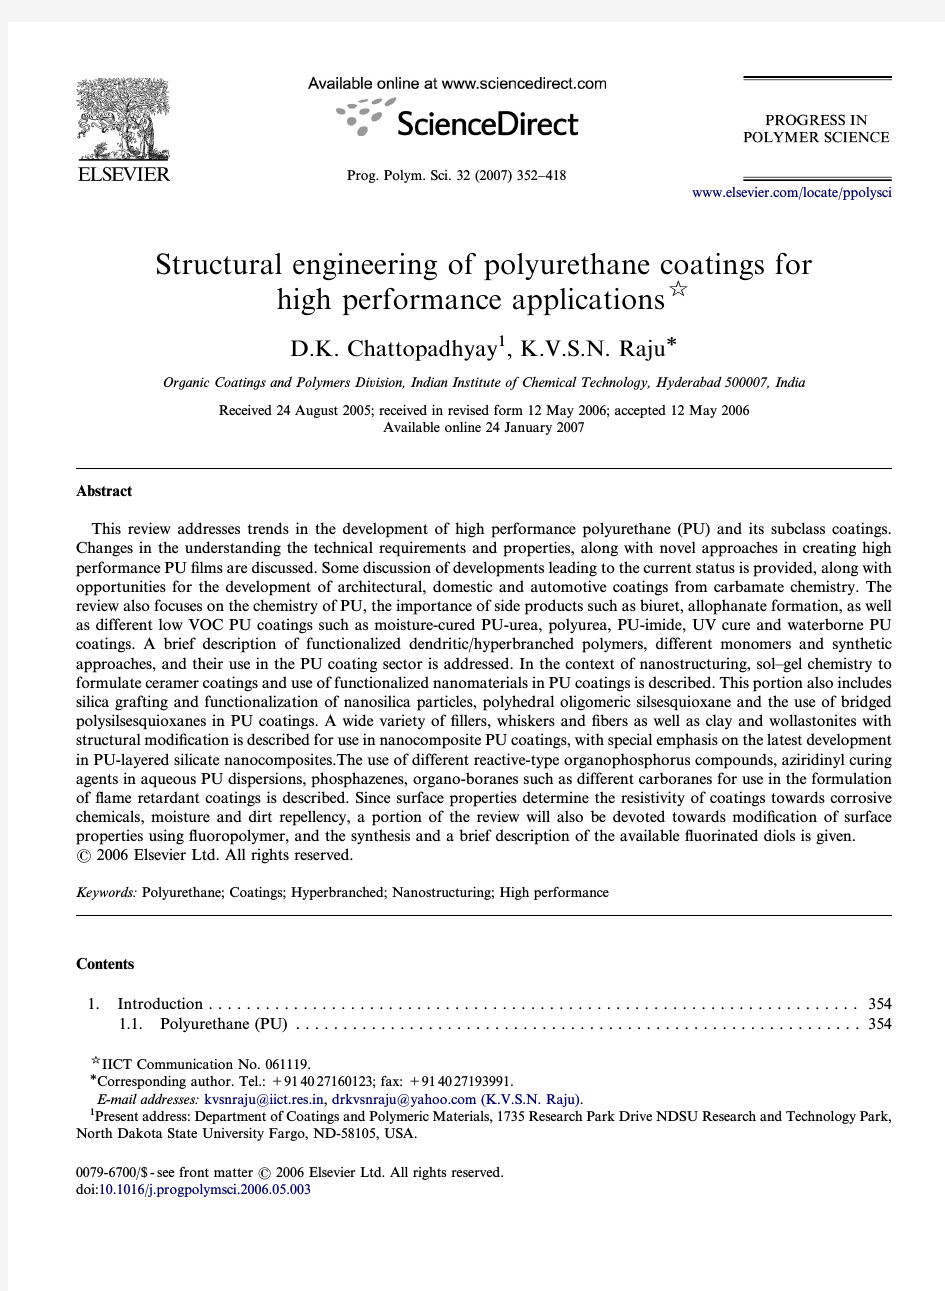 Structural engineering of polyurethane coatings for high performance applications